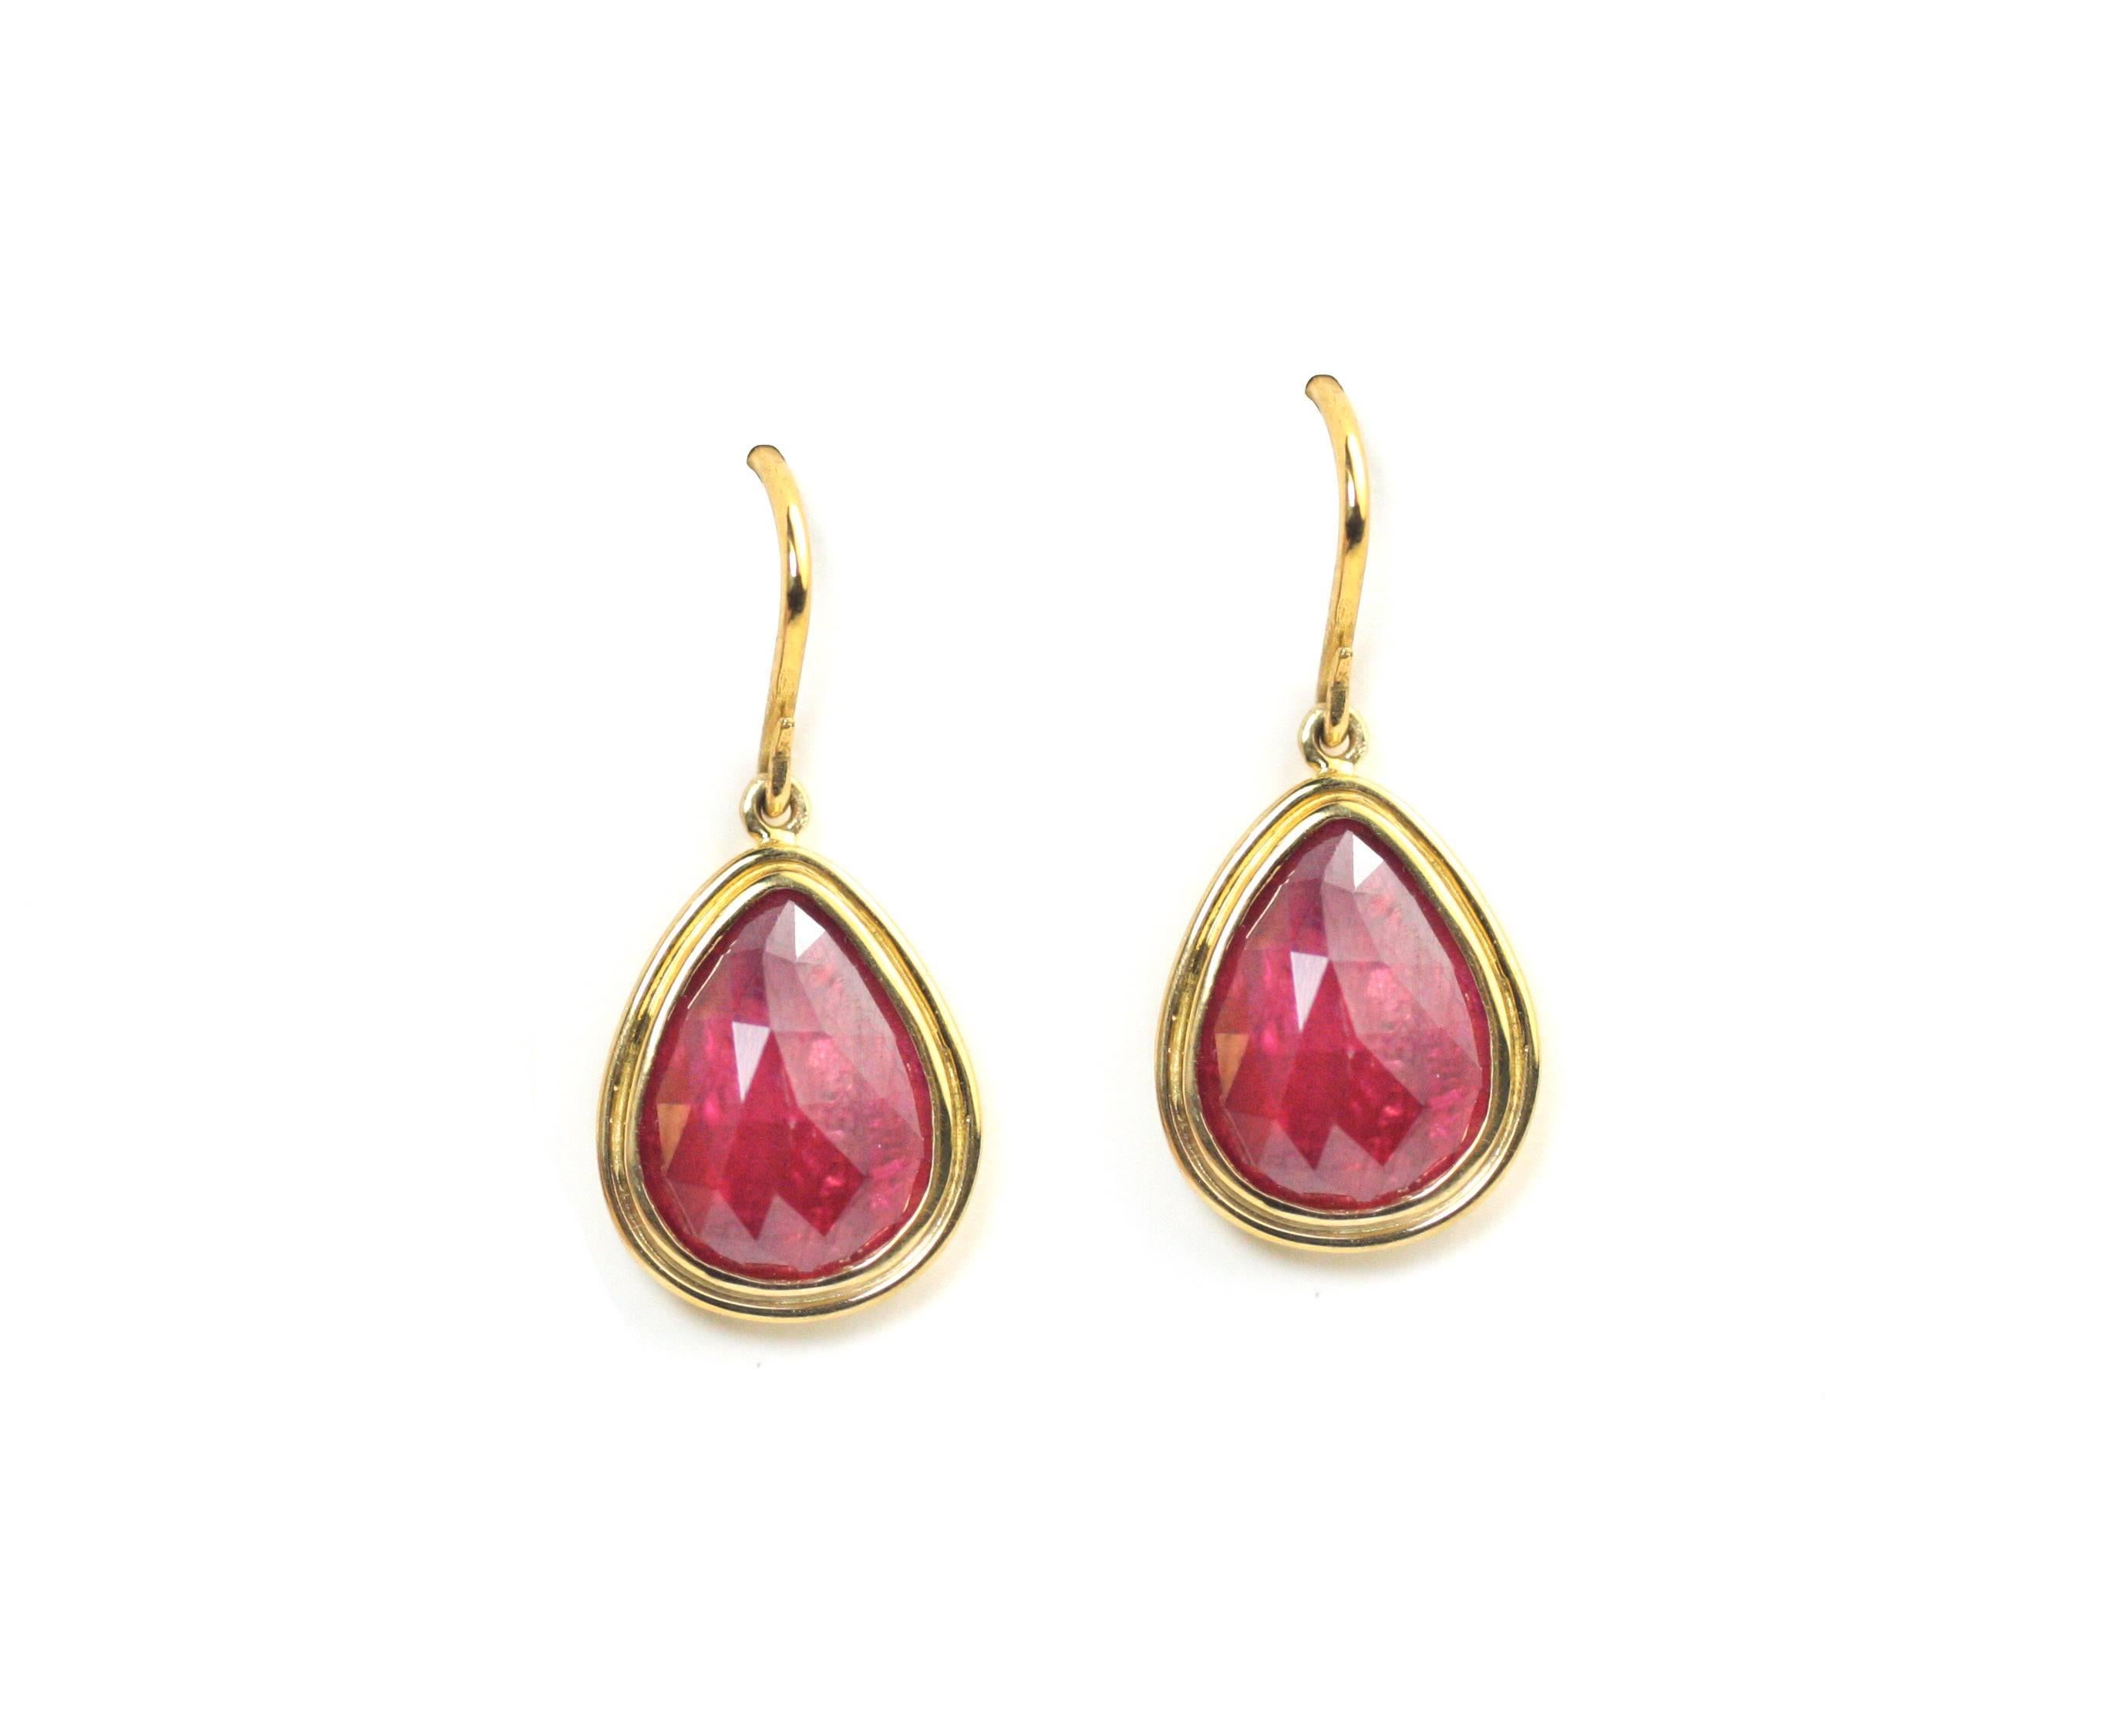 These beautiful earrings are made with 22KT and 18KT gold and contain 2 rose cut Rubies weighing approximately 2 carats.

Designed and made in-house by Julius Cohen New York.